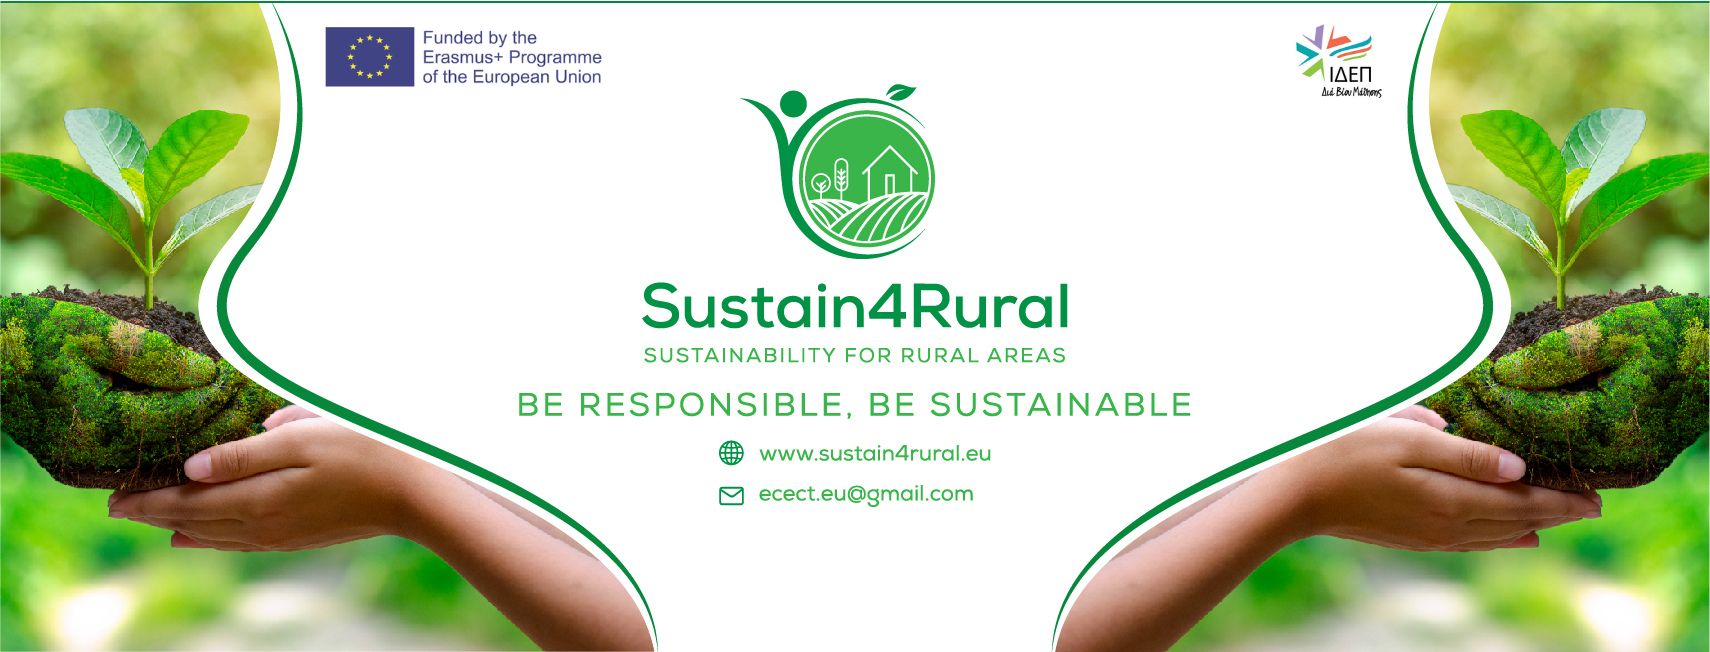 Sustain4Rural Sustainability for rural areas